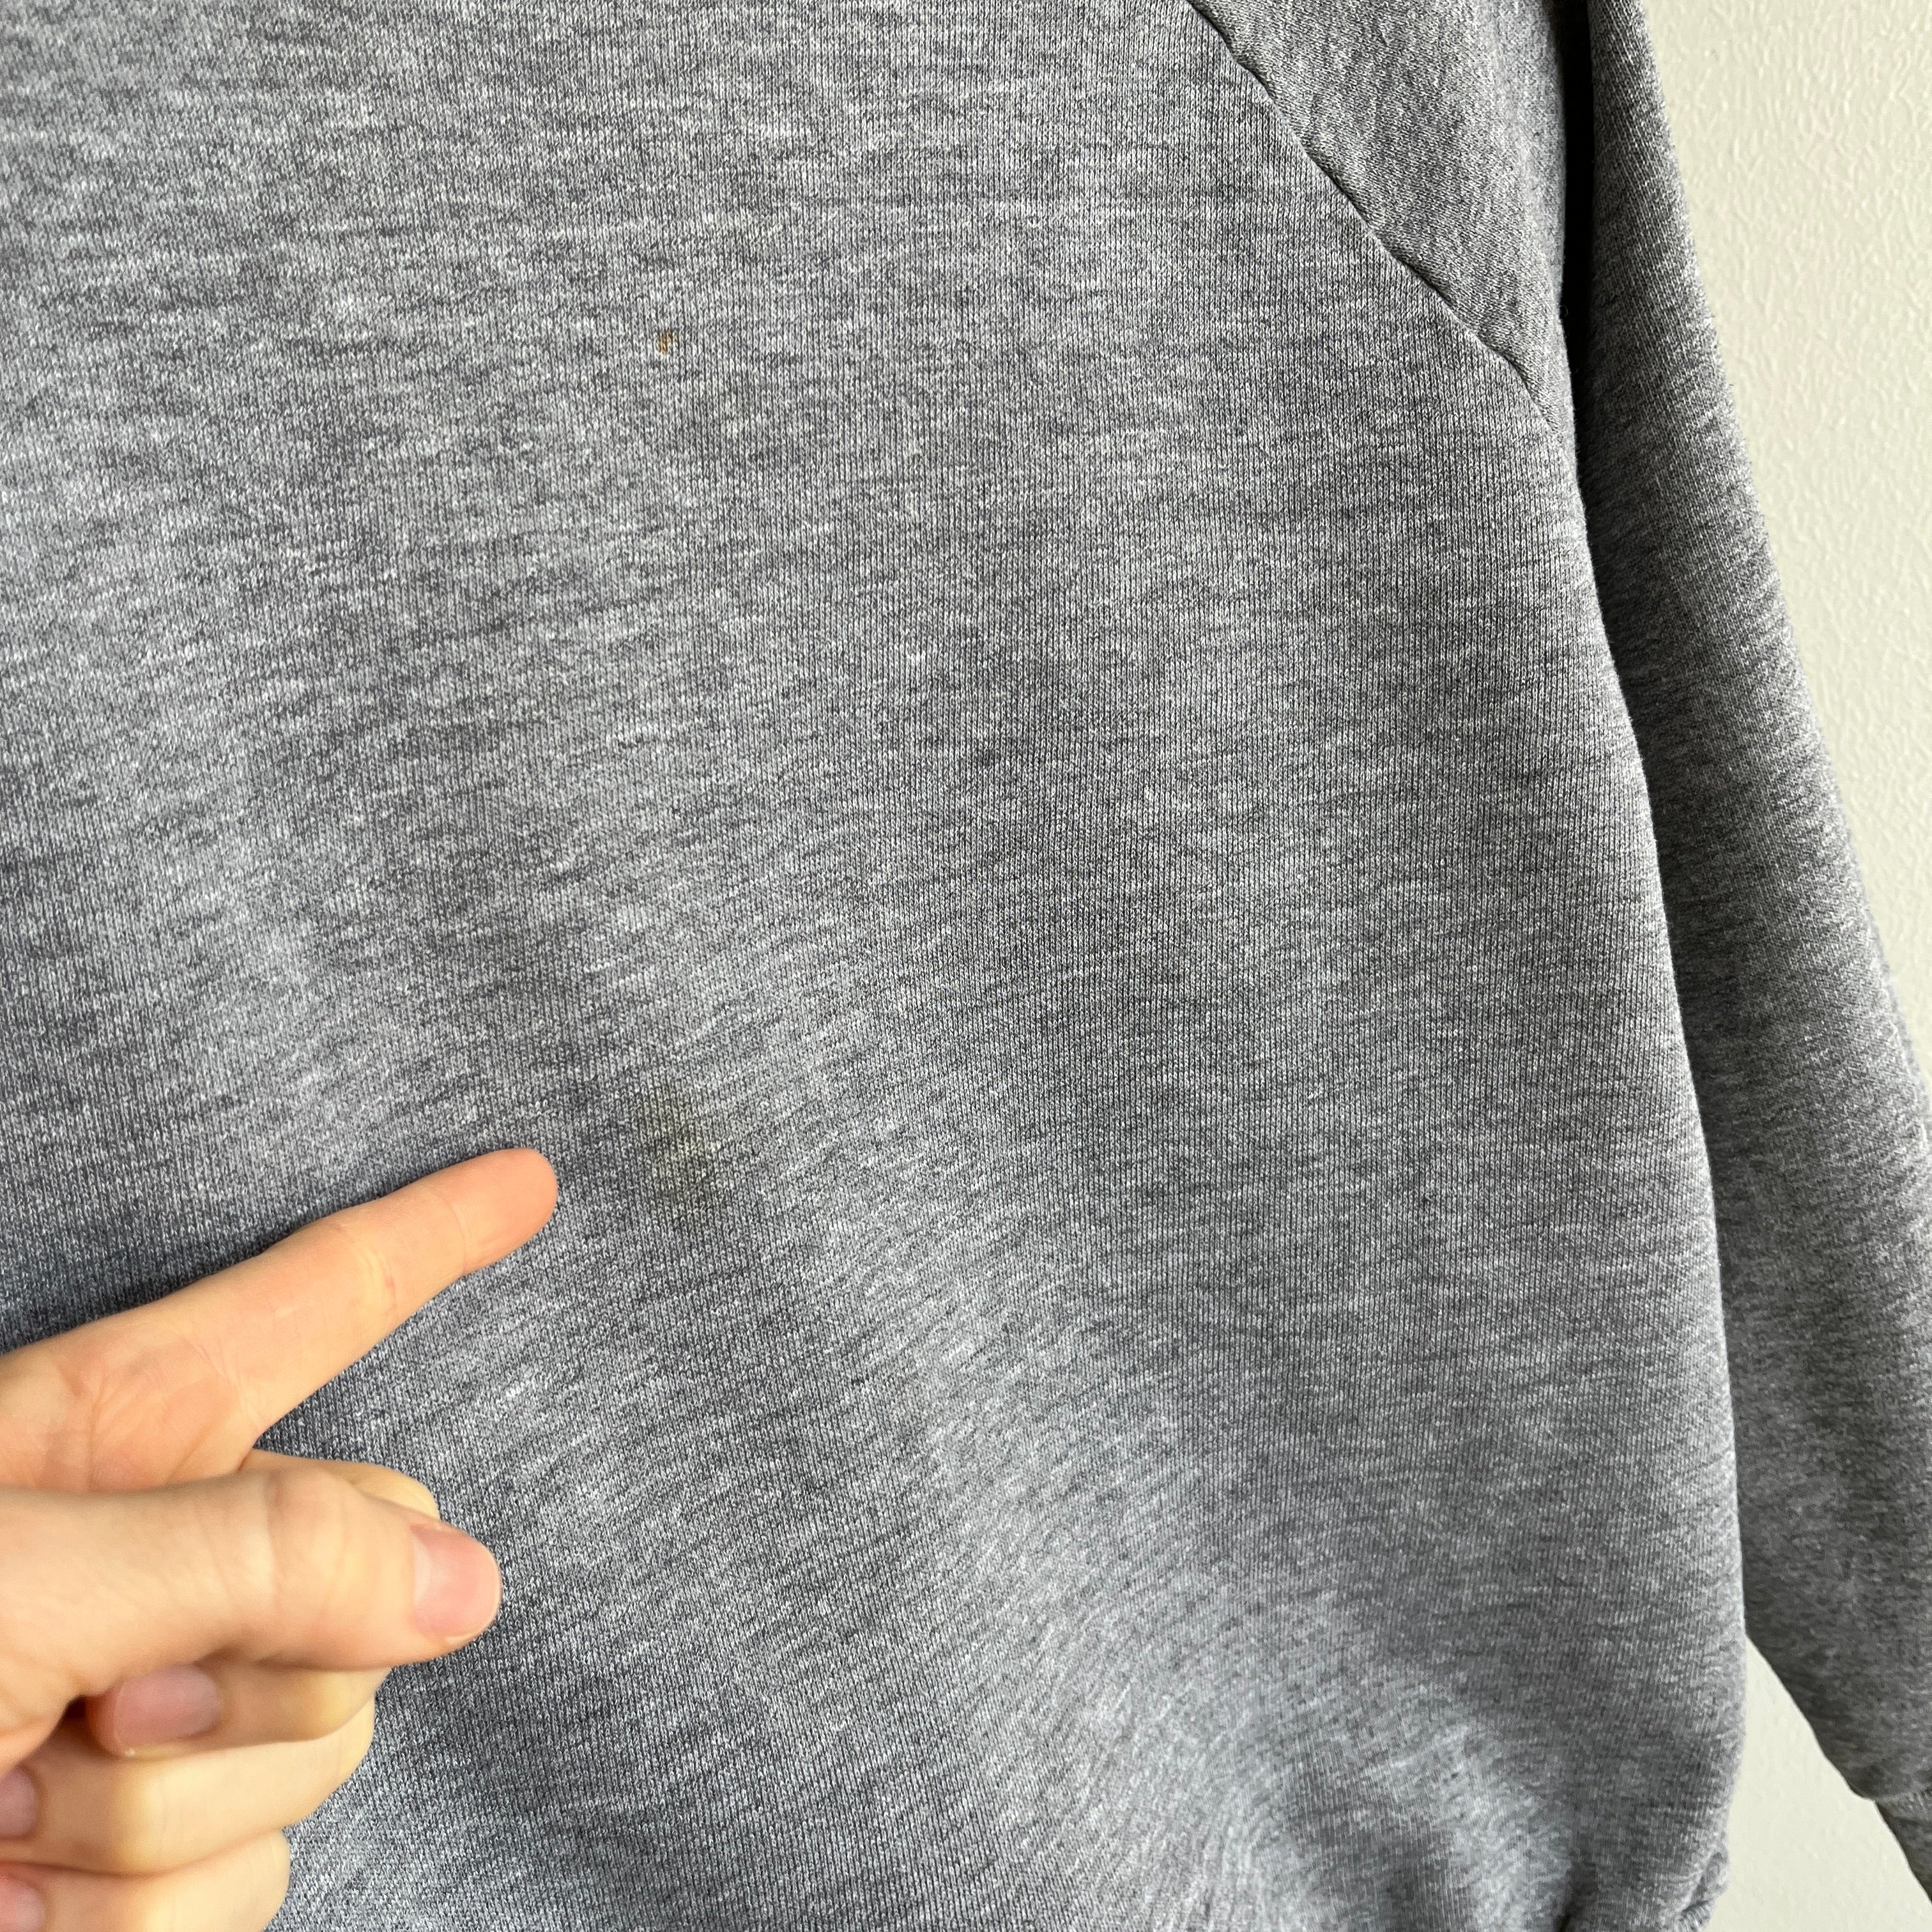 1980s Medium Gray Sweatshirt with Mending on the Back Collar - a Goodie!